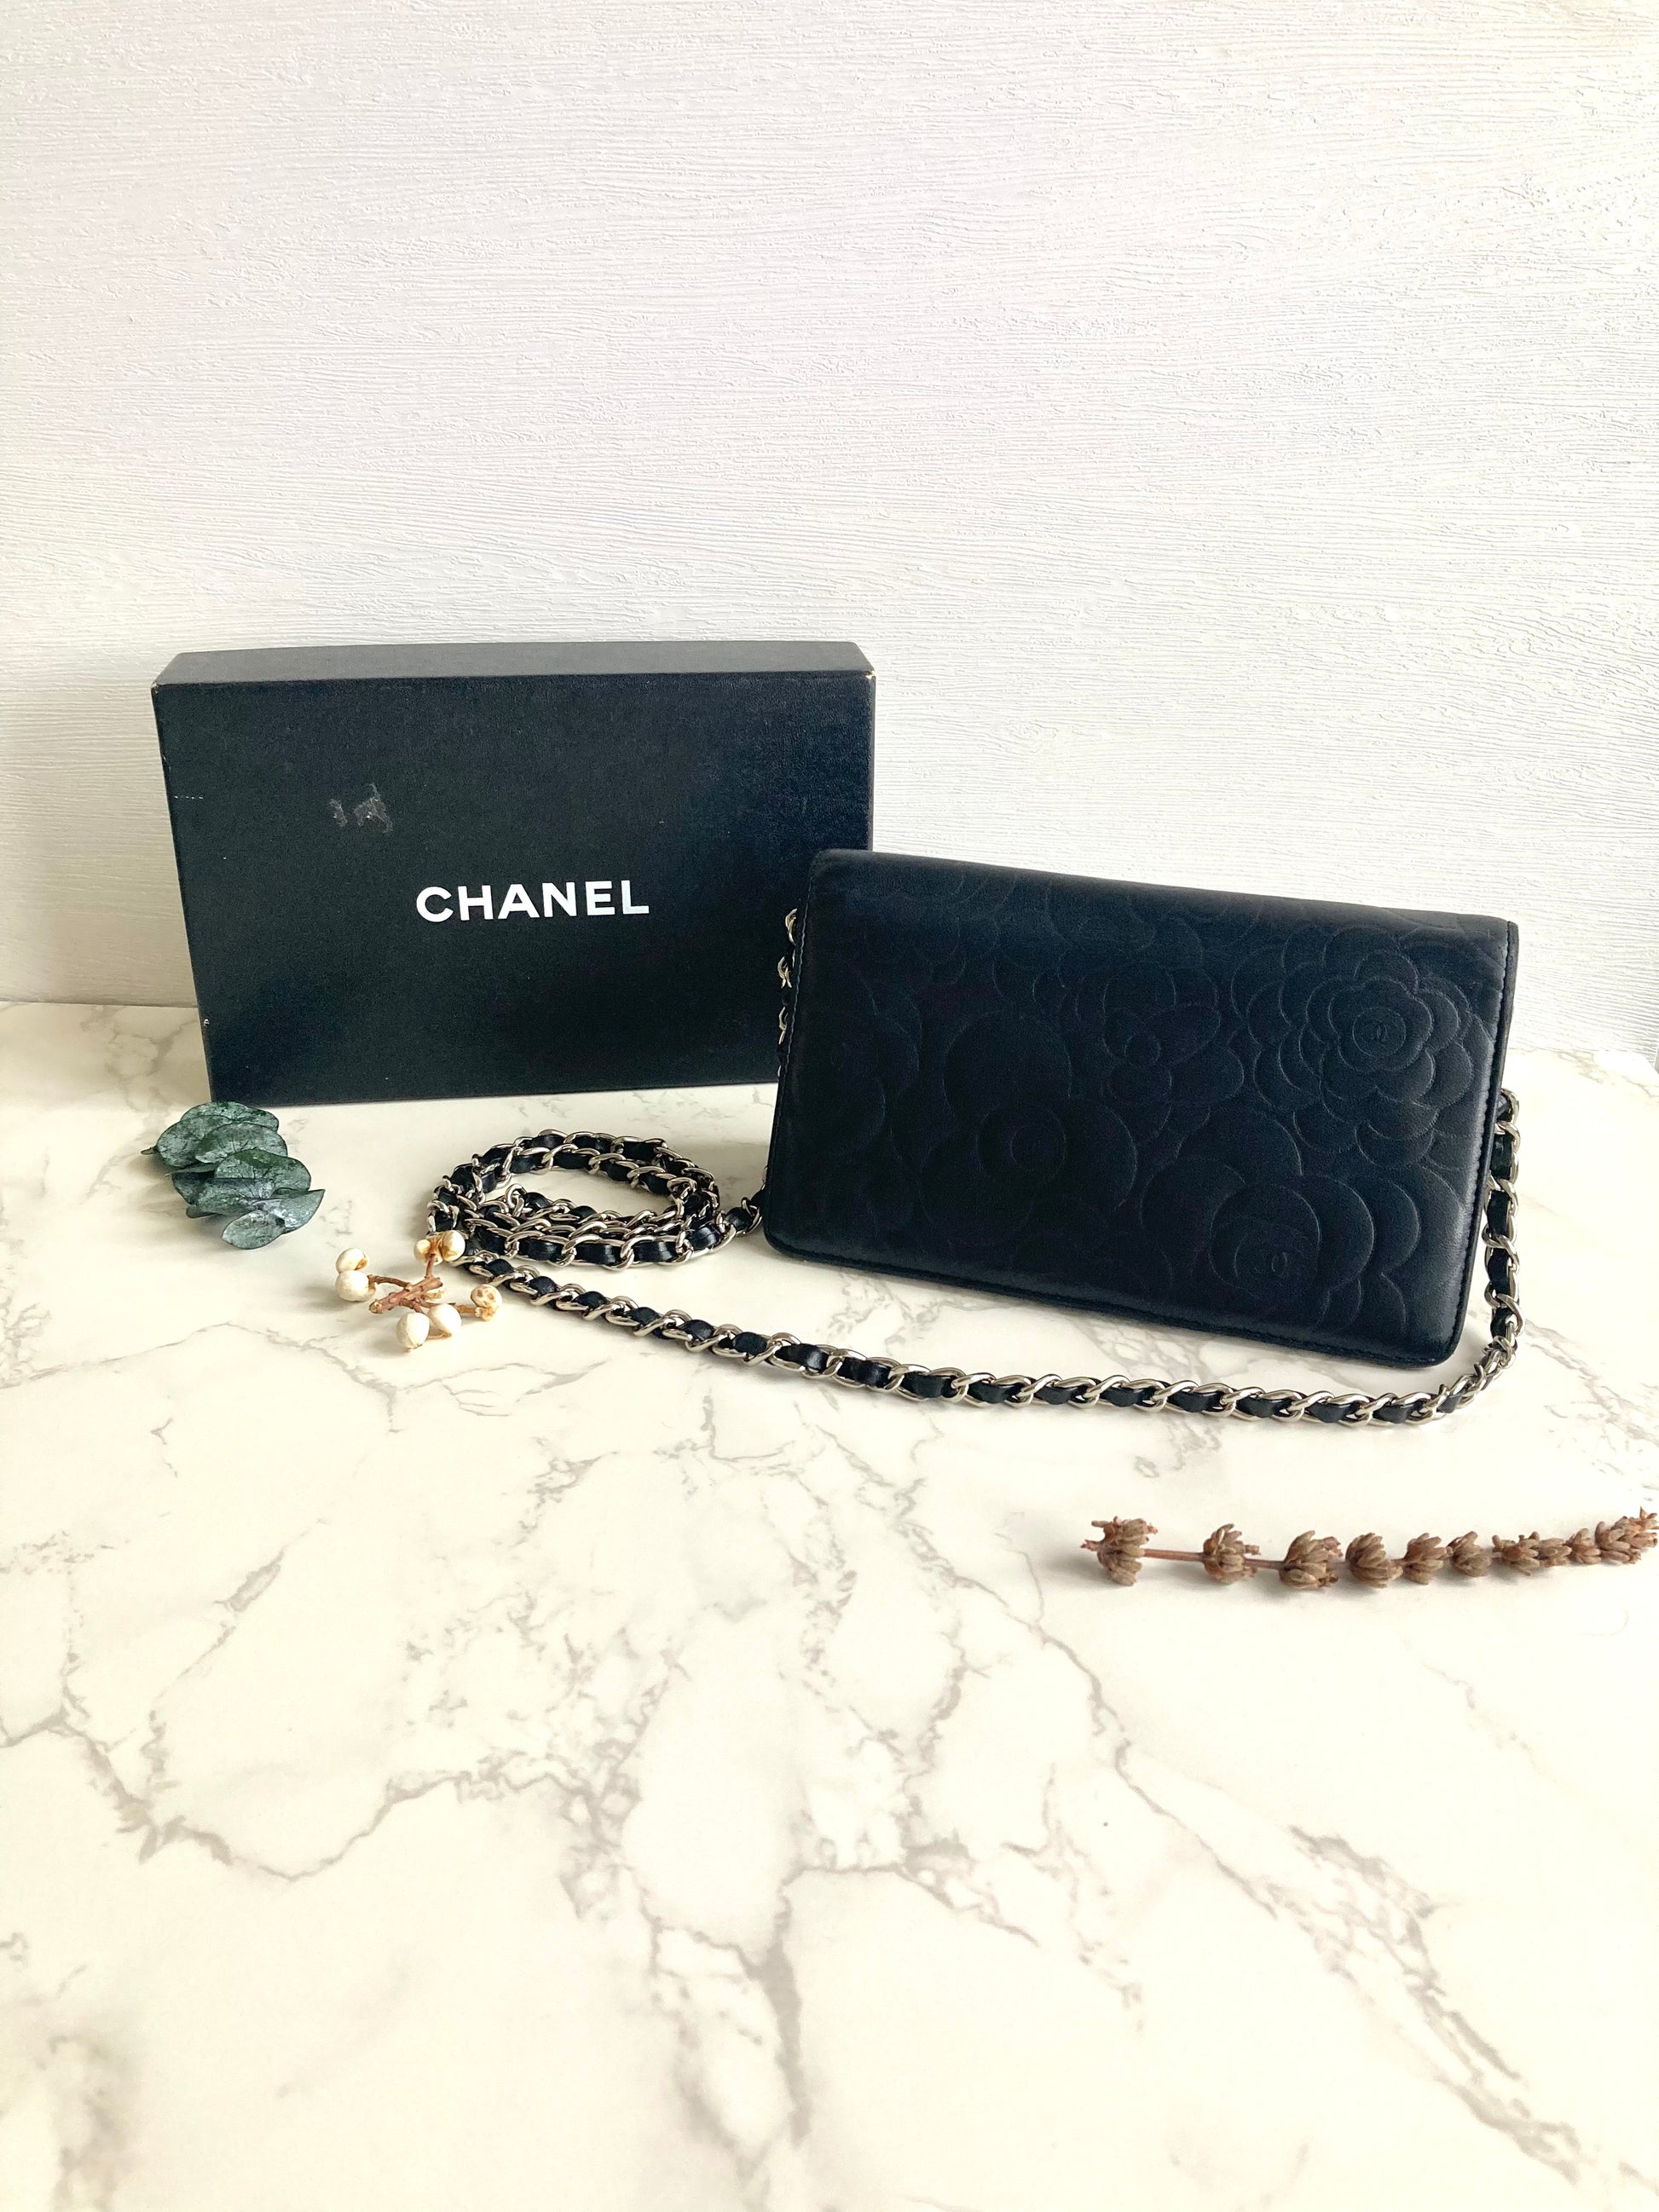 camellia wallet on chain chanel